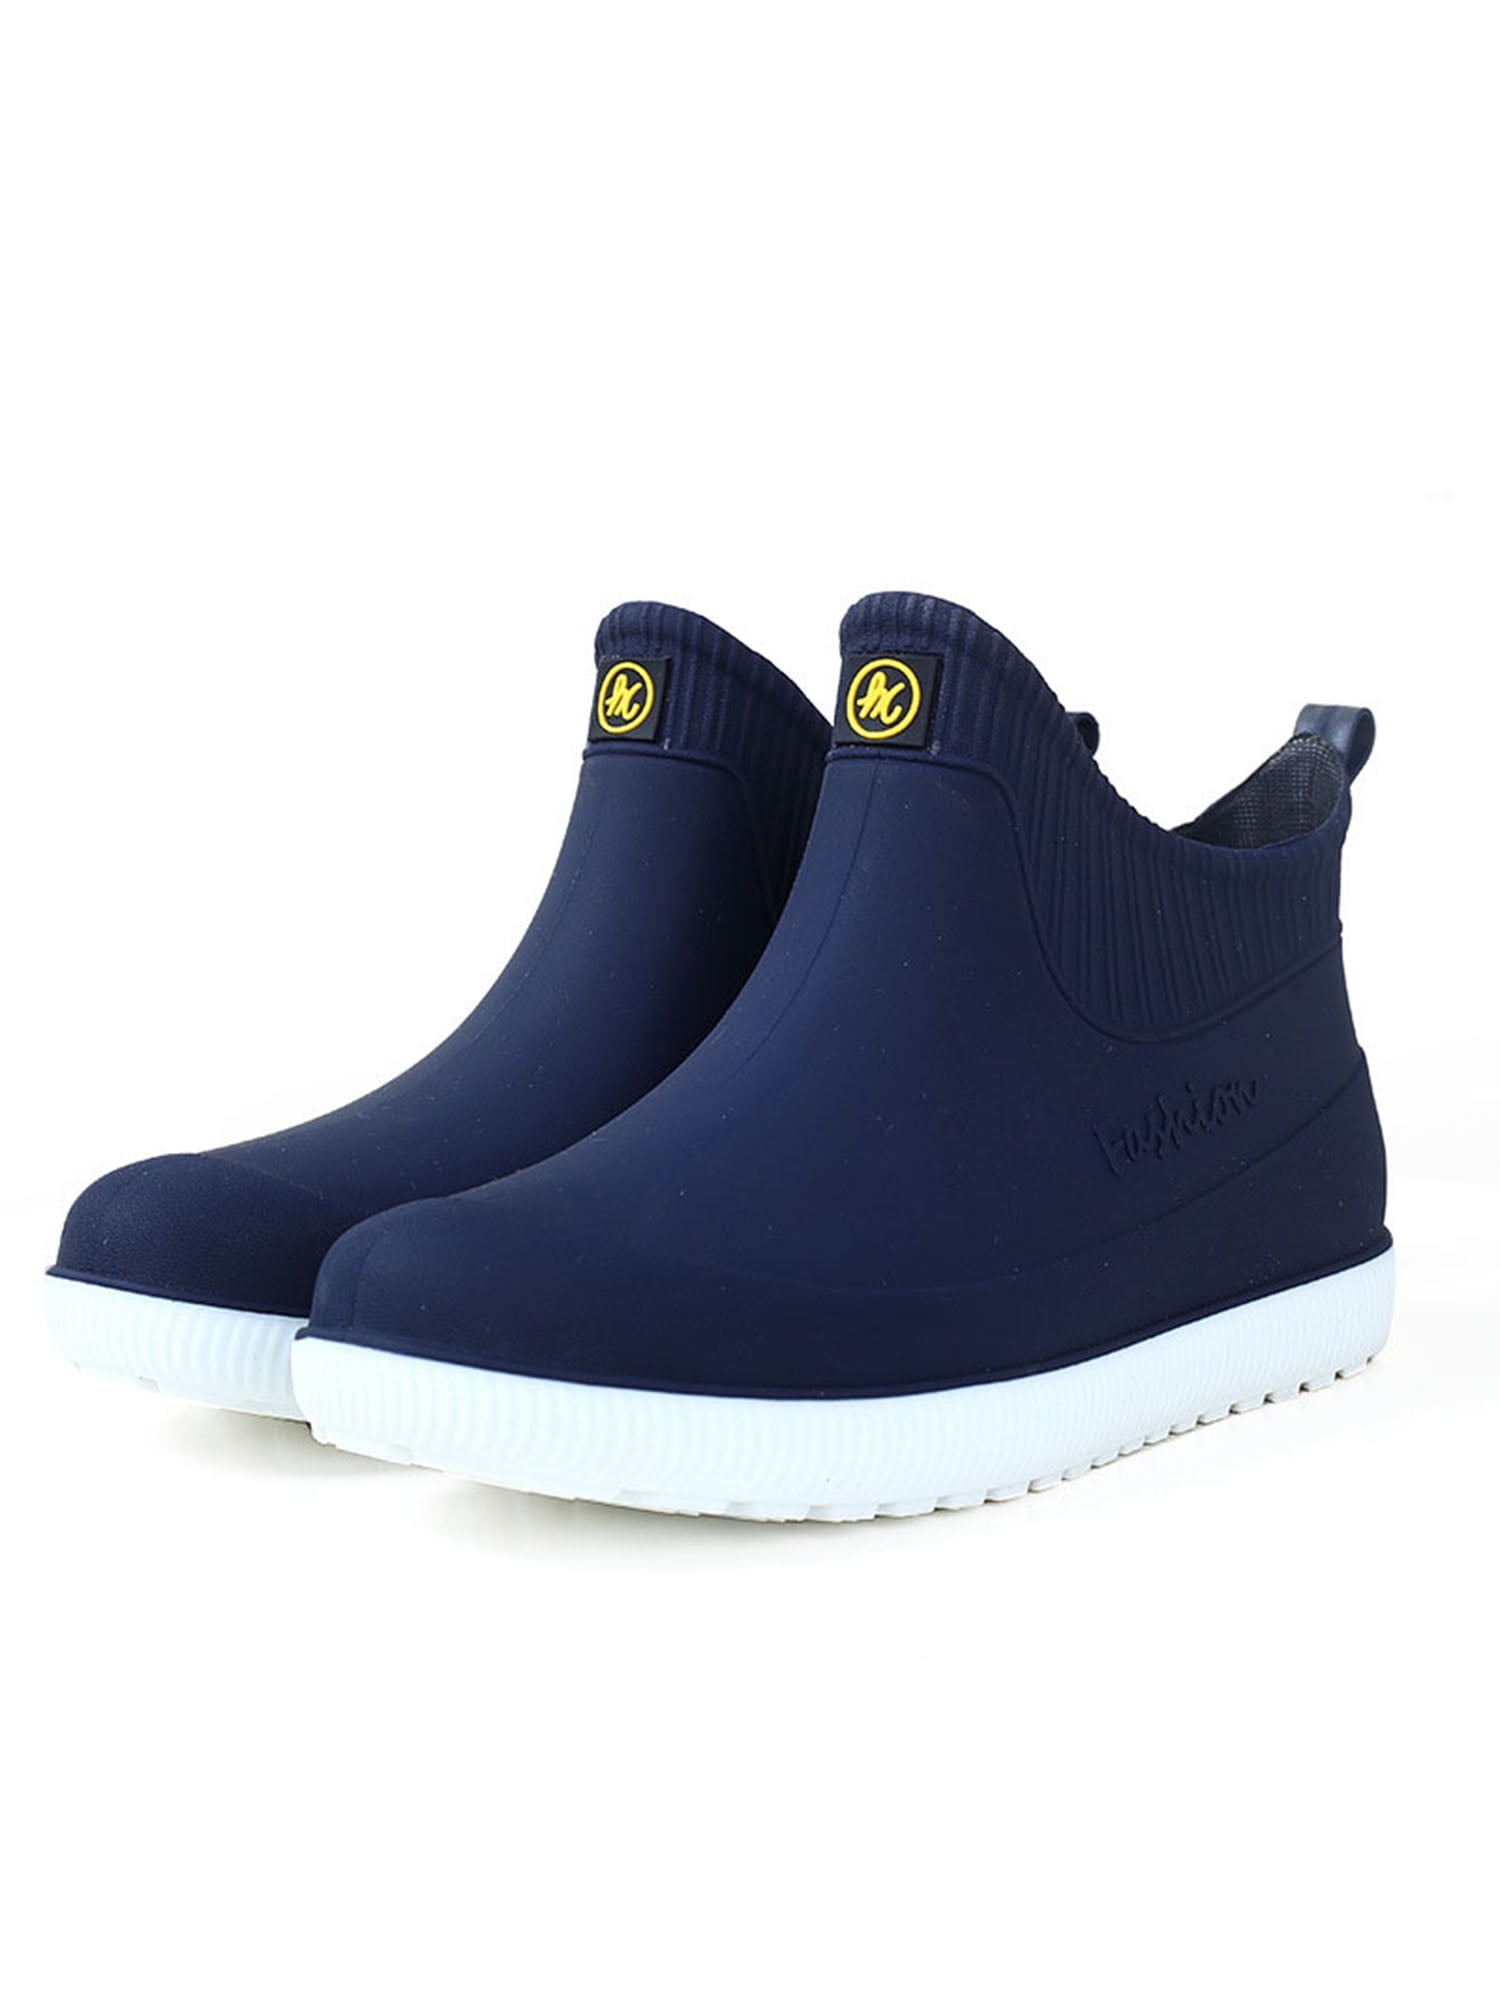 Waterproof Shoes Anti Slip Ankle Rain Boots Mens Pull On Casual Kitchen Gardener Discount